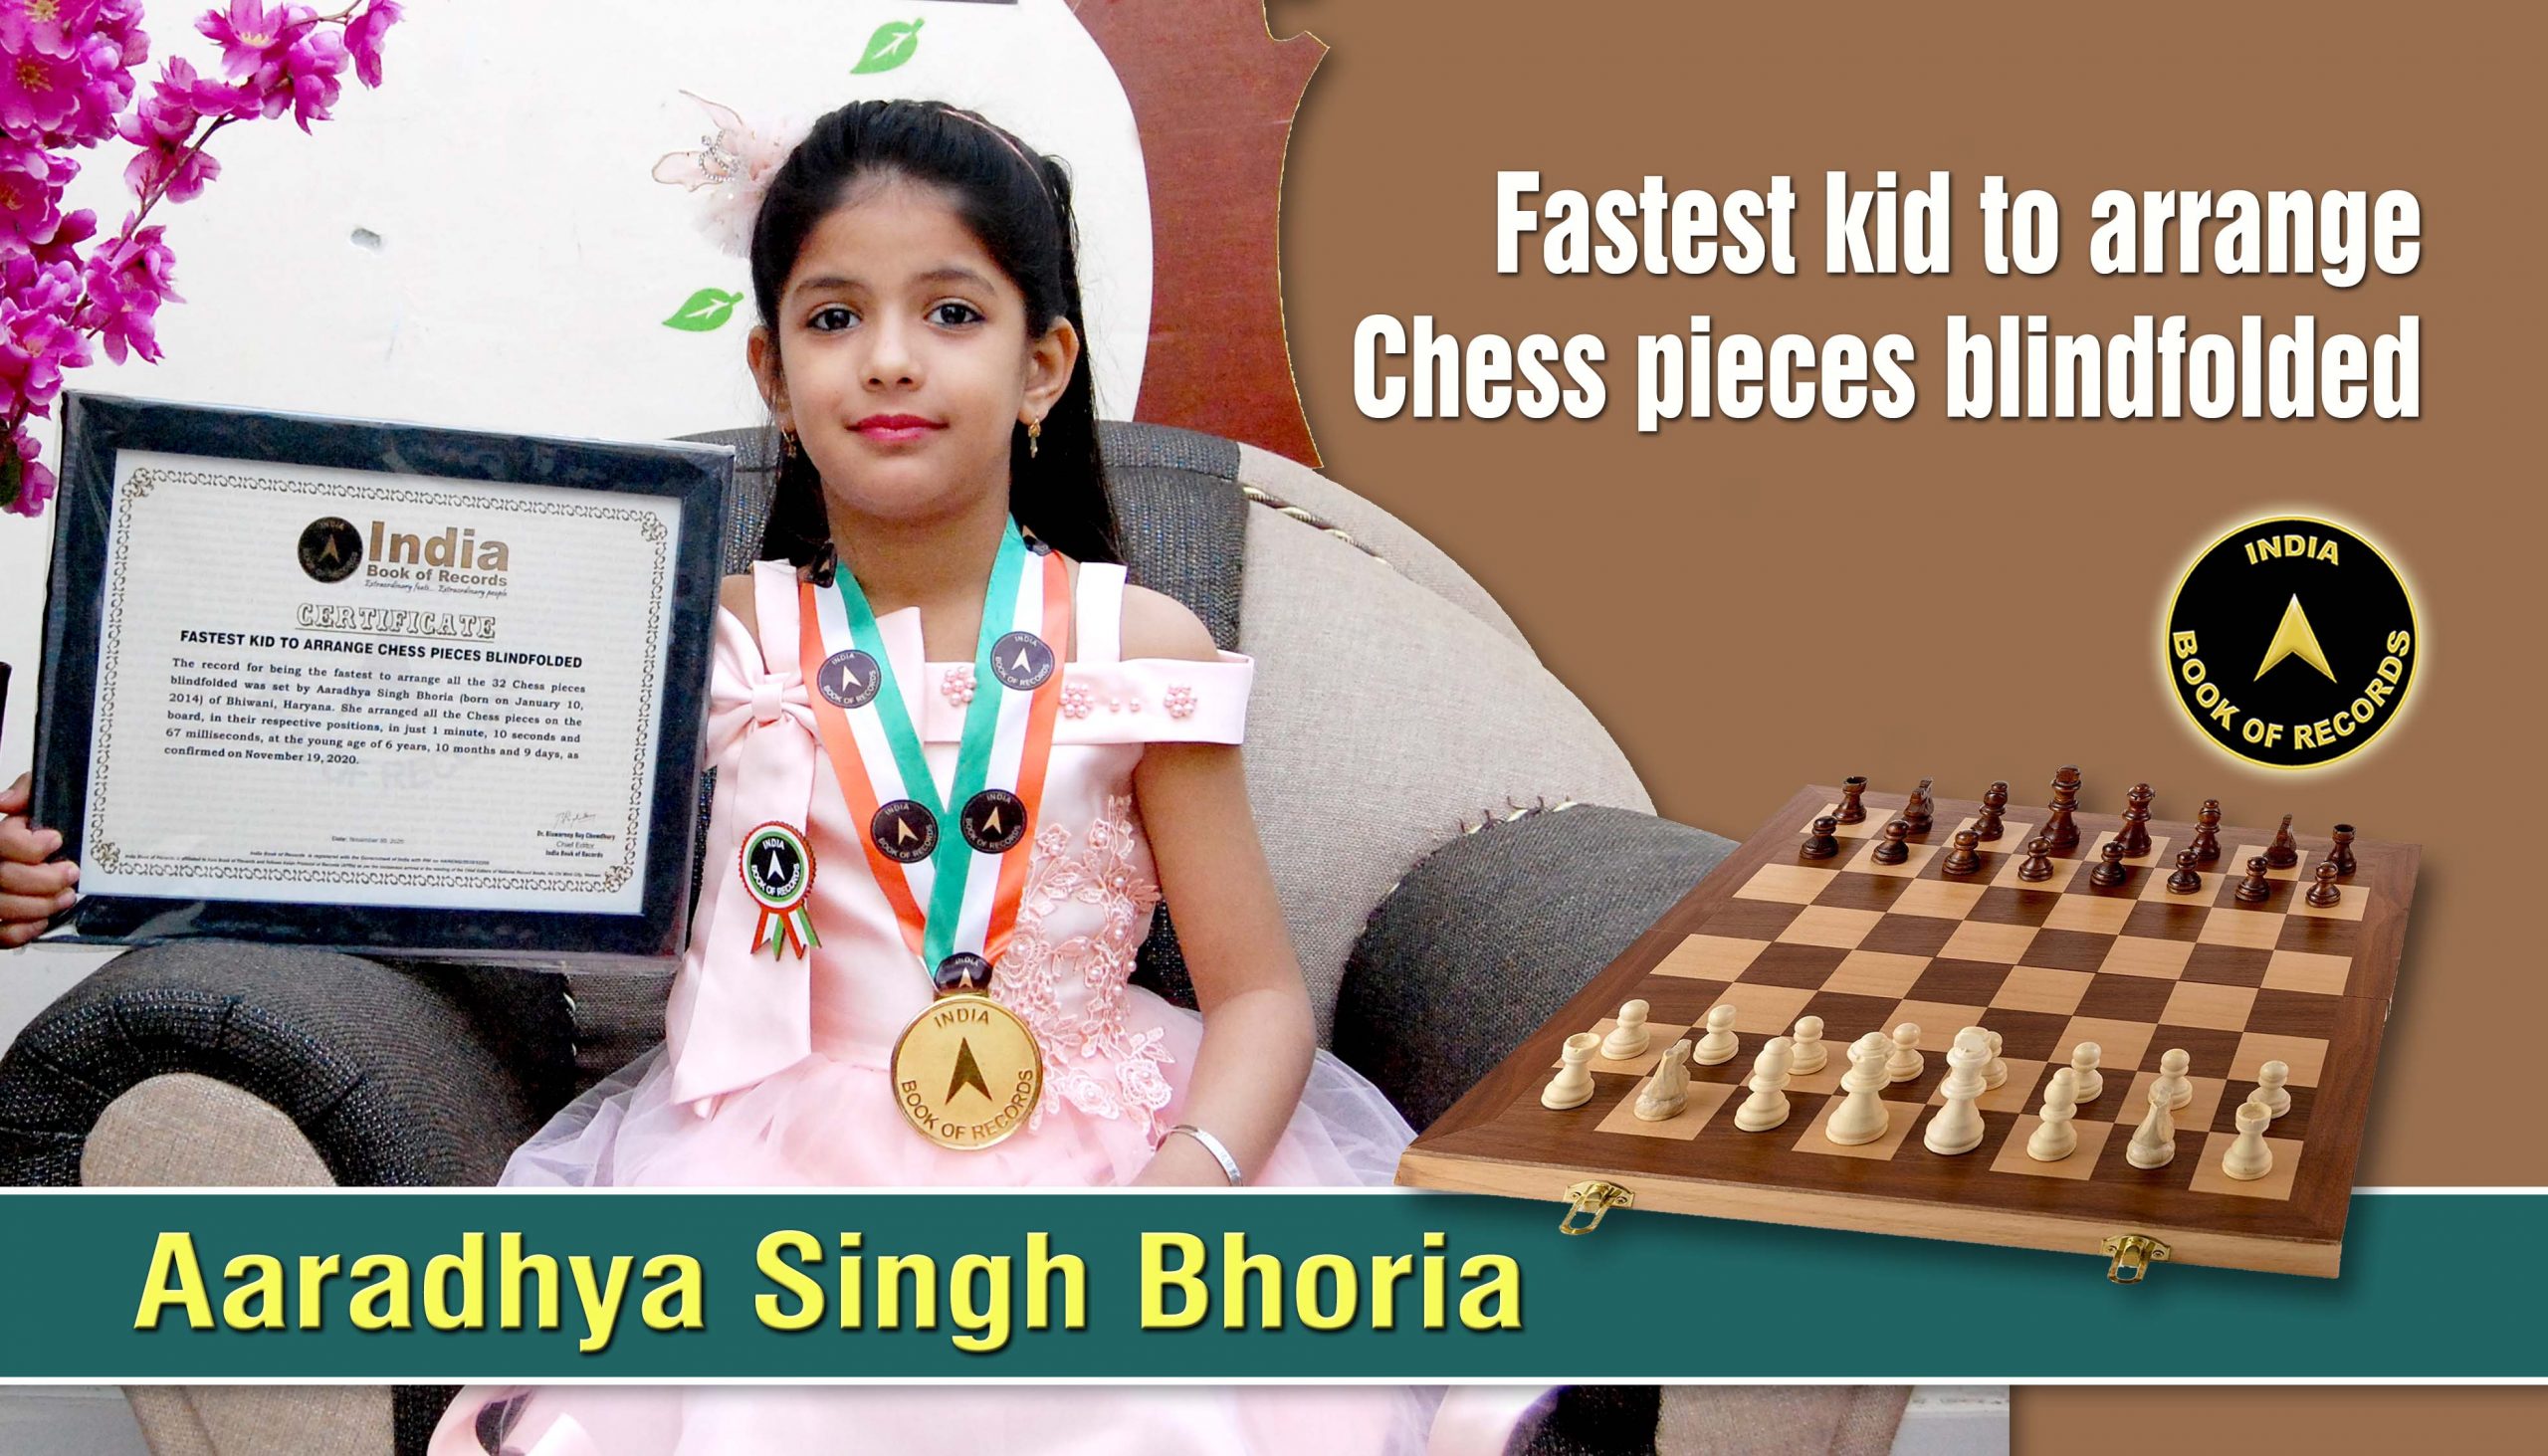 FASTEST ARRANGEMENT OF CHESSMEN ON A CHESS BOARD BY A KID - IBR